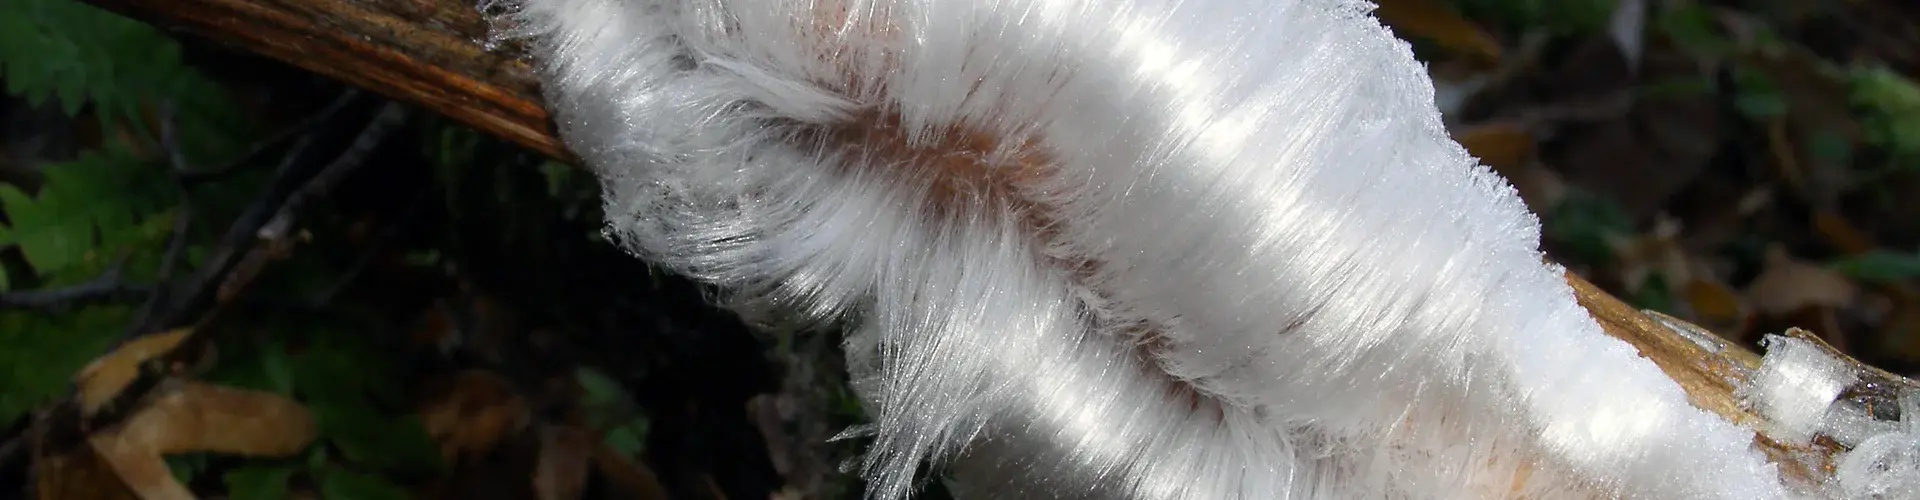 Hair ice growing on a branch in a forest near Brachbach, Germany (Credit: Gisela Preuß)